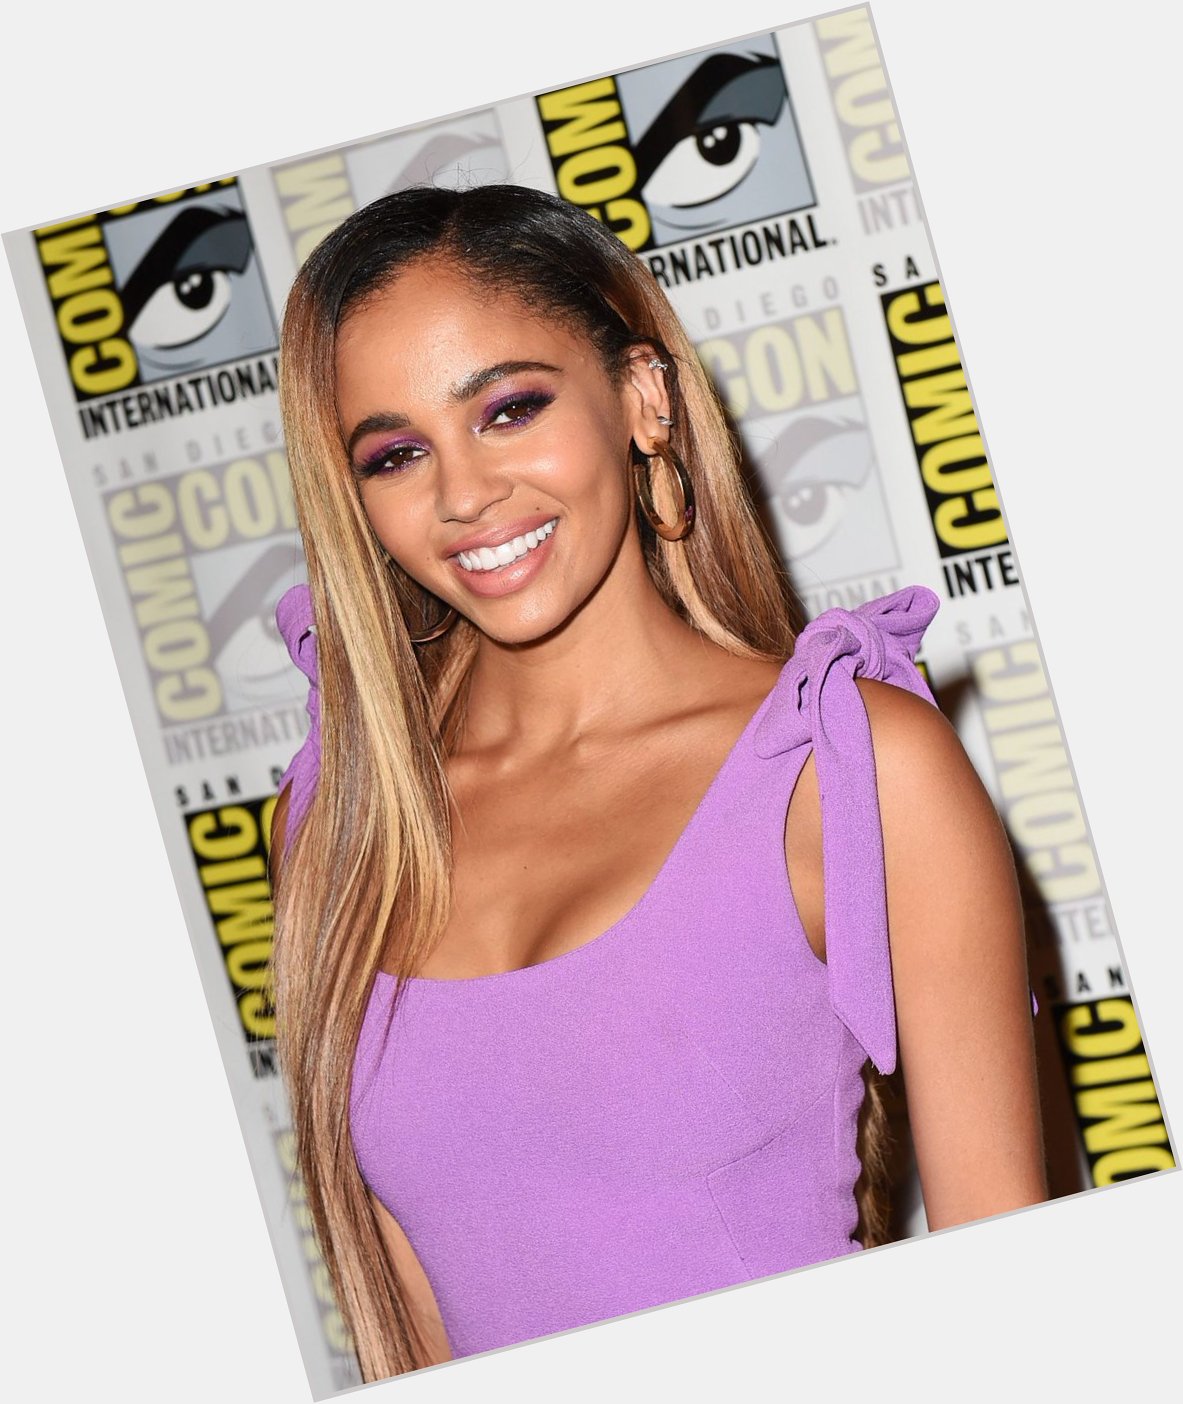 Happy 29th Birthday Shout Out to the lovely Vanessa Morgan aka TT on Riverdale!! 